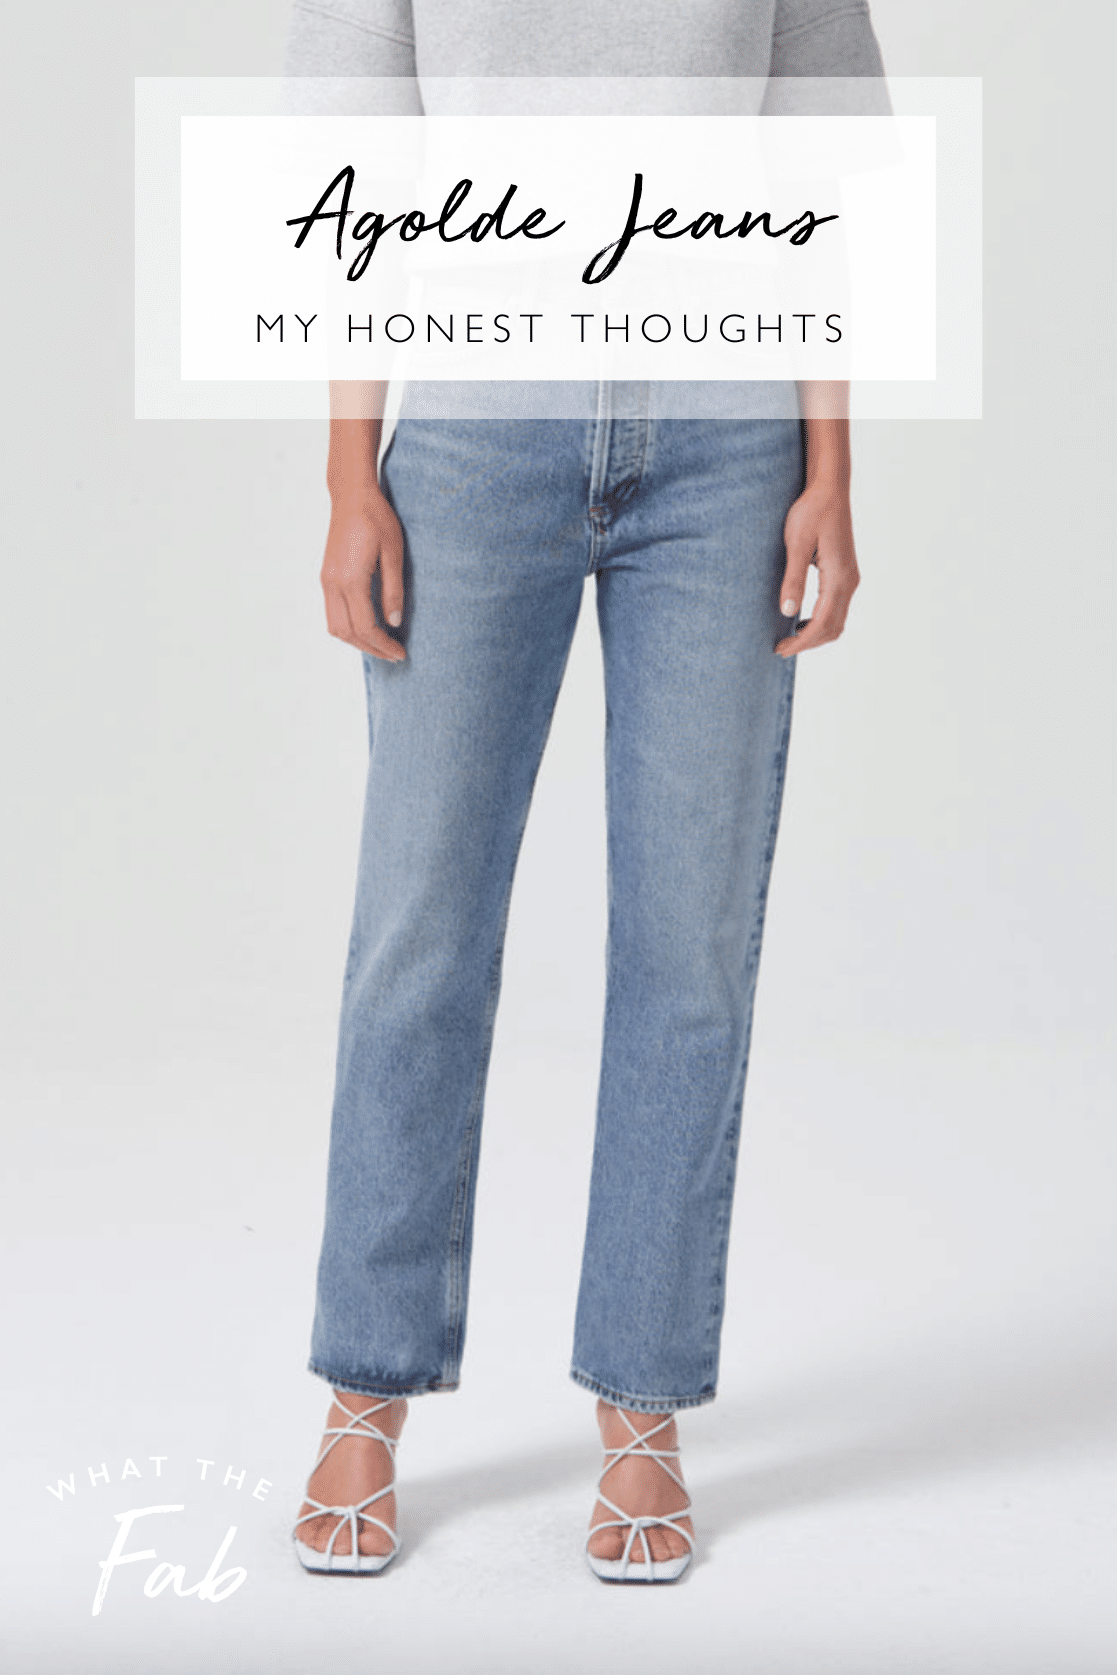 My honest thoughts on Agolde jeans, by fashion blogger What The Fab